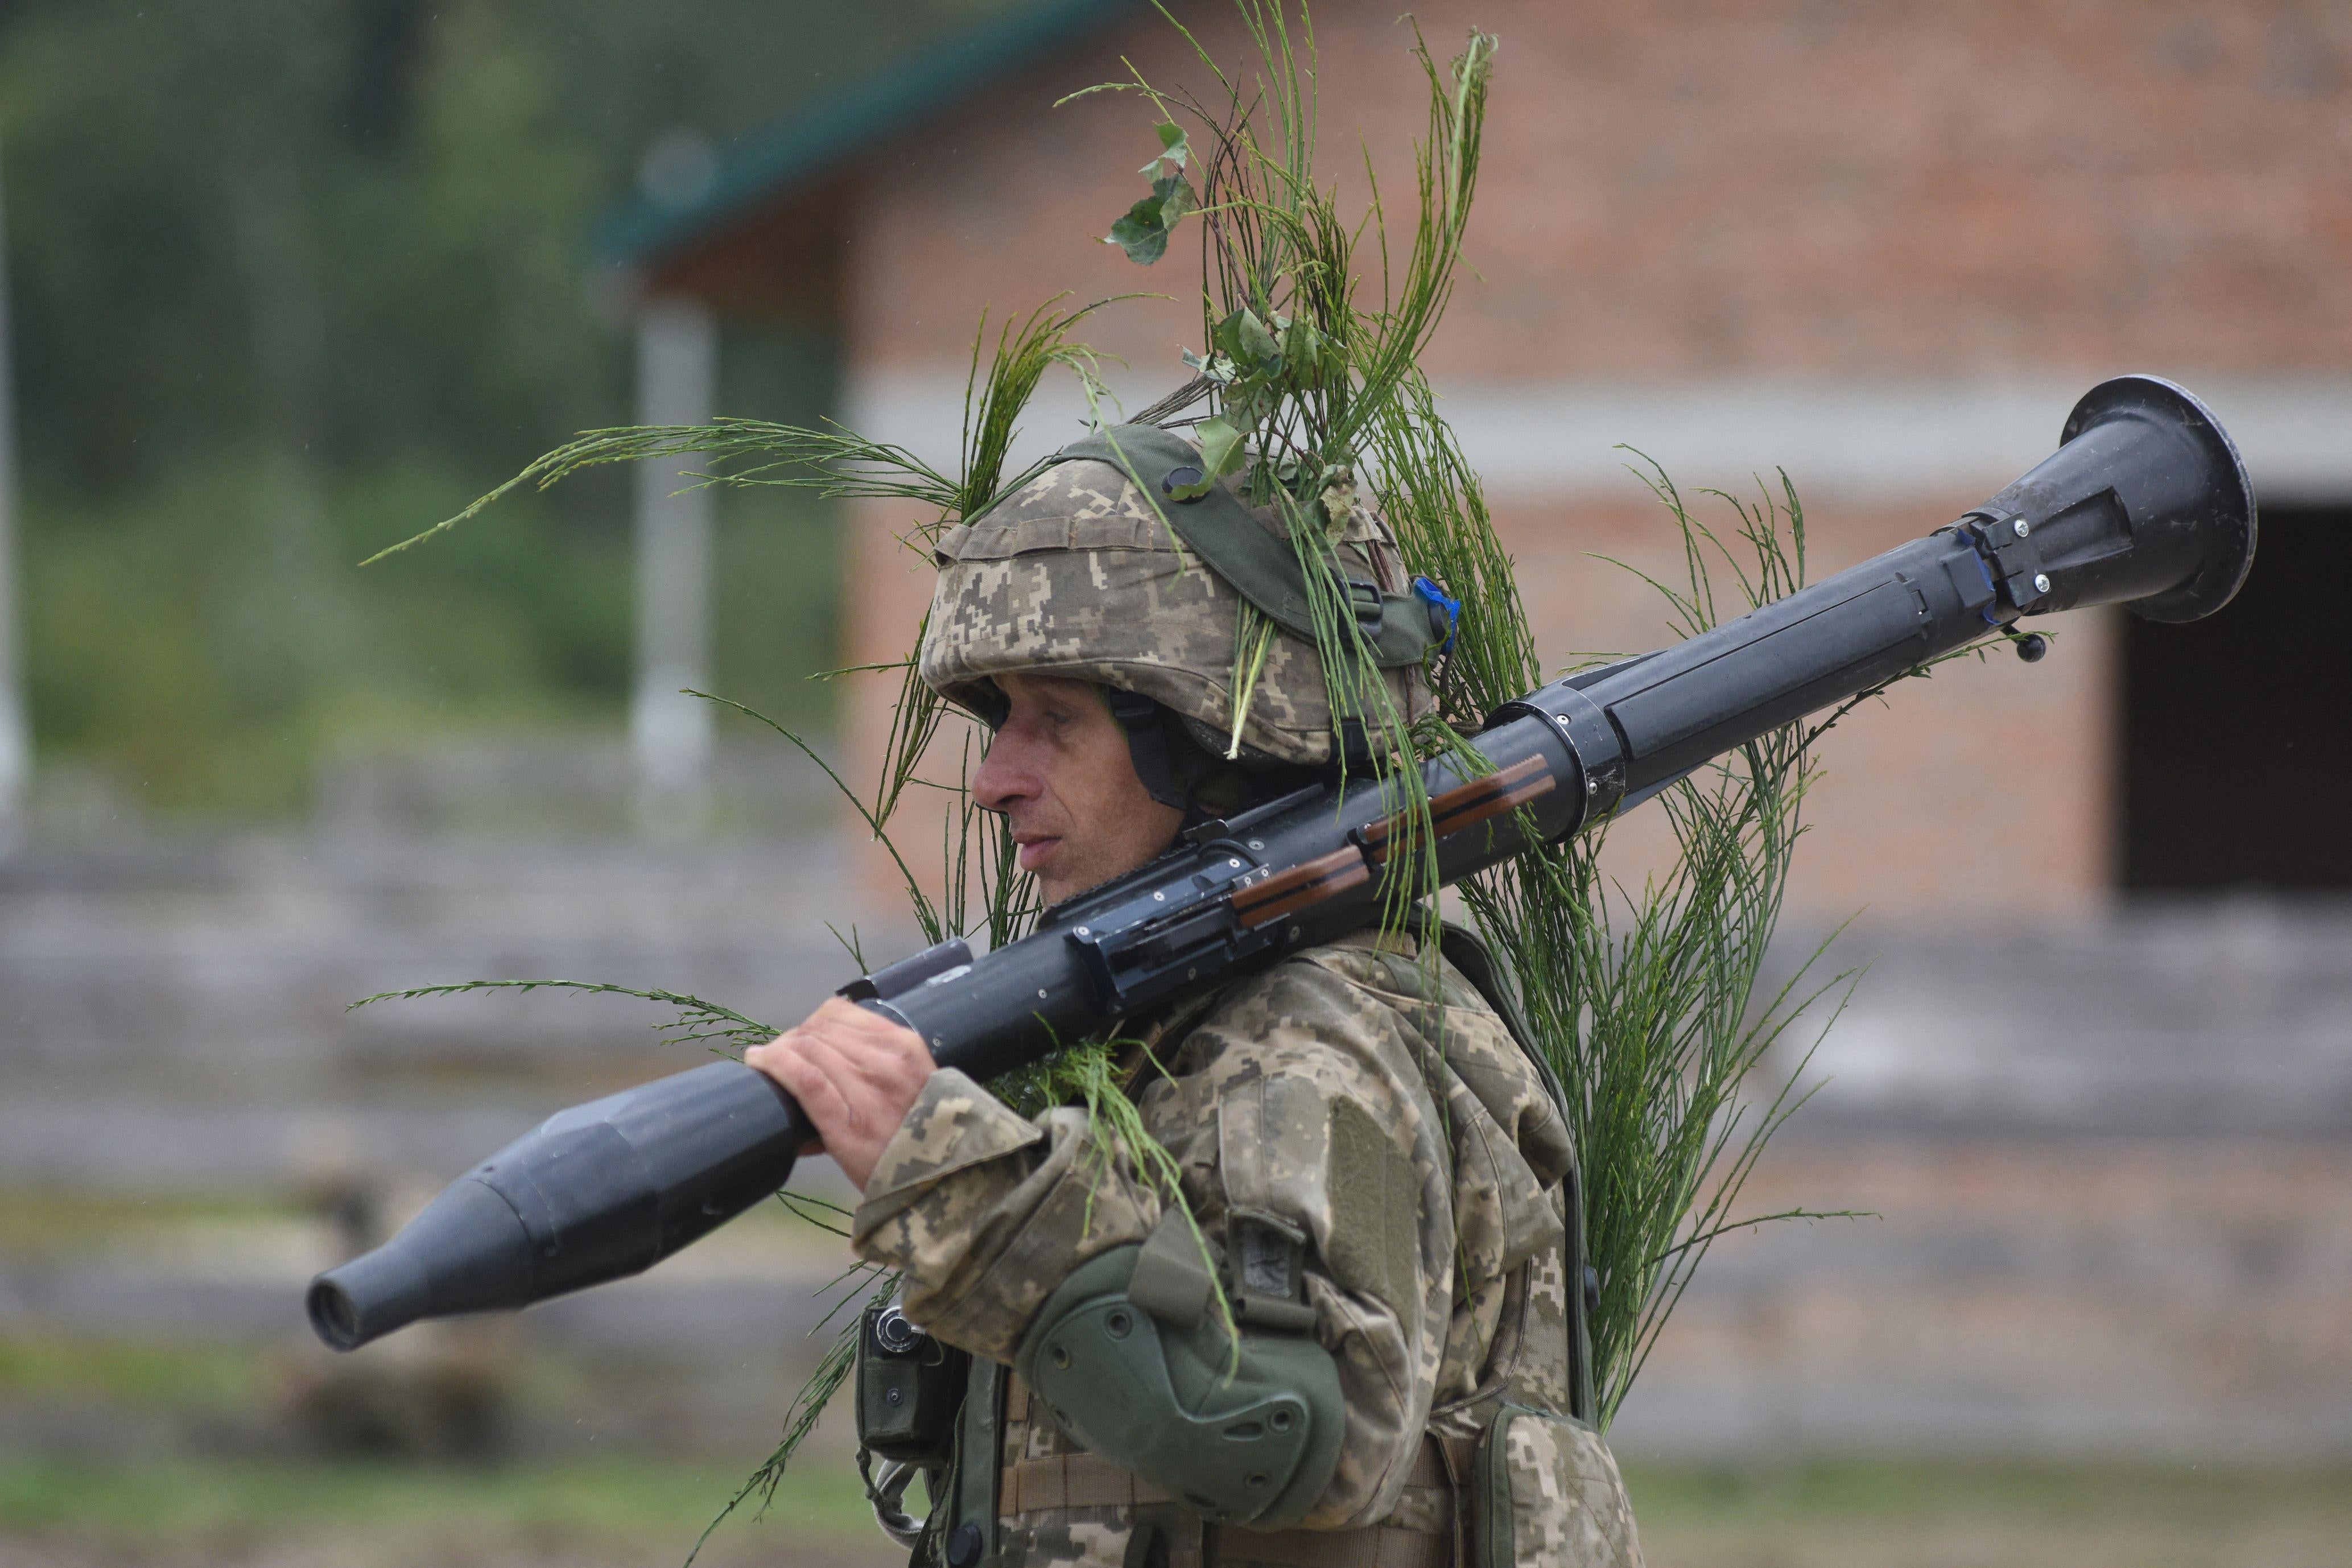 A soldier in fatigues walks outside holding a bazooka over his shoulder